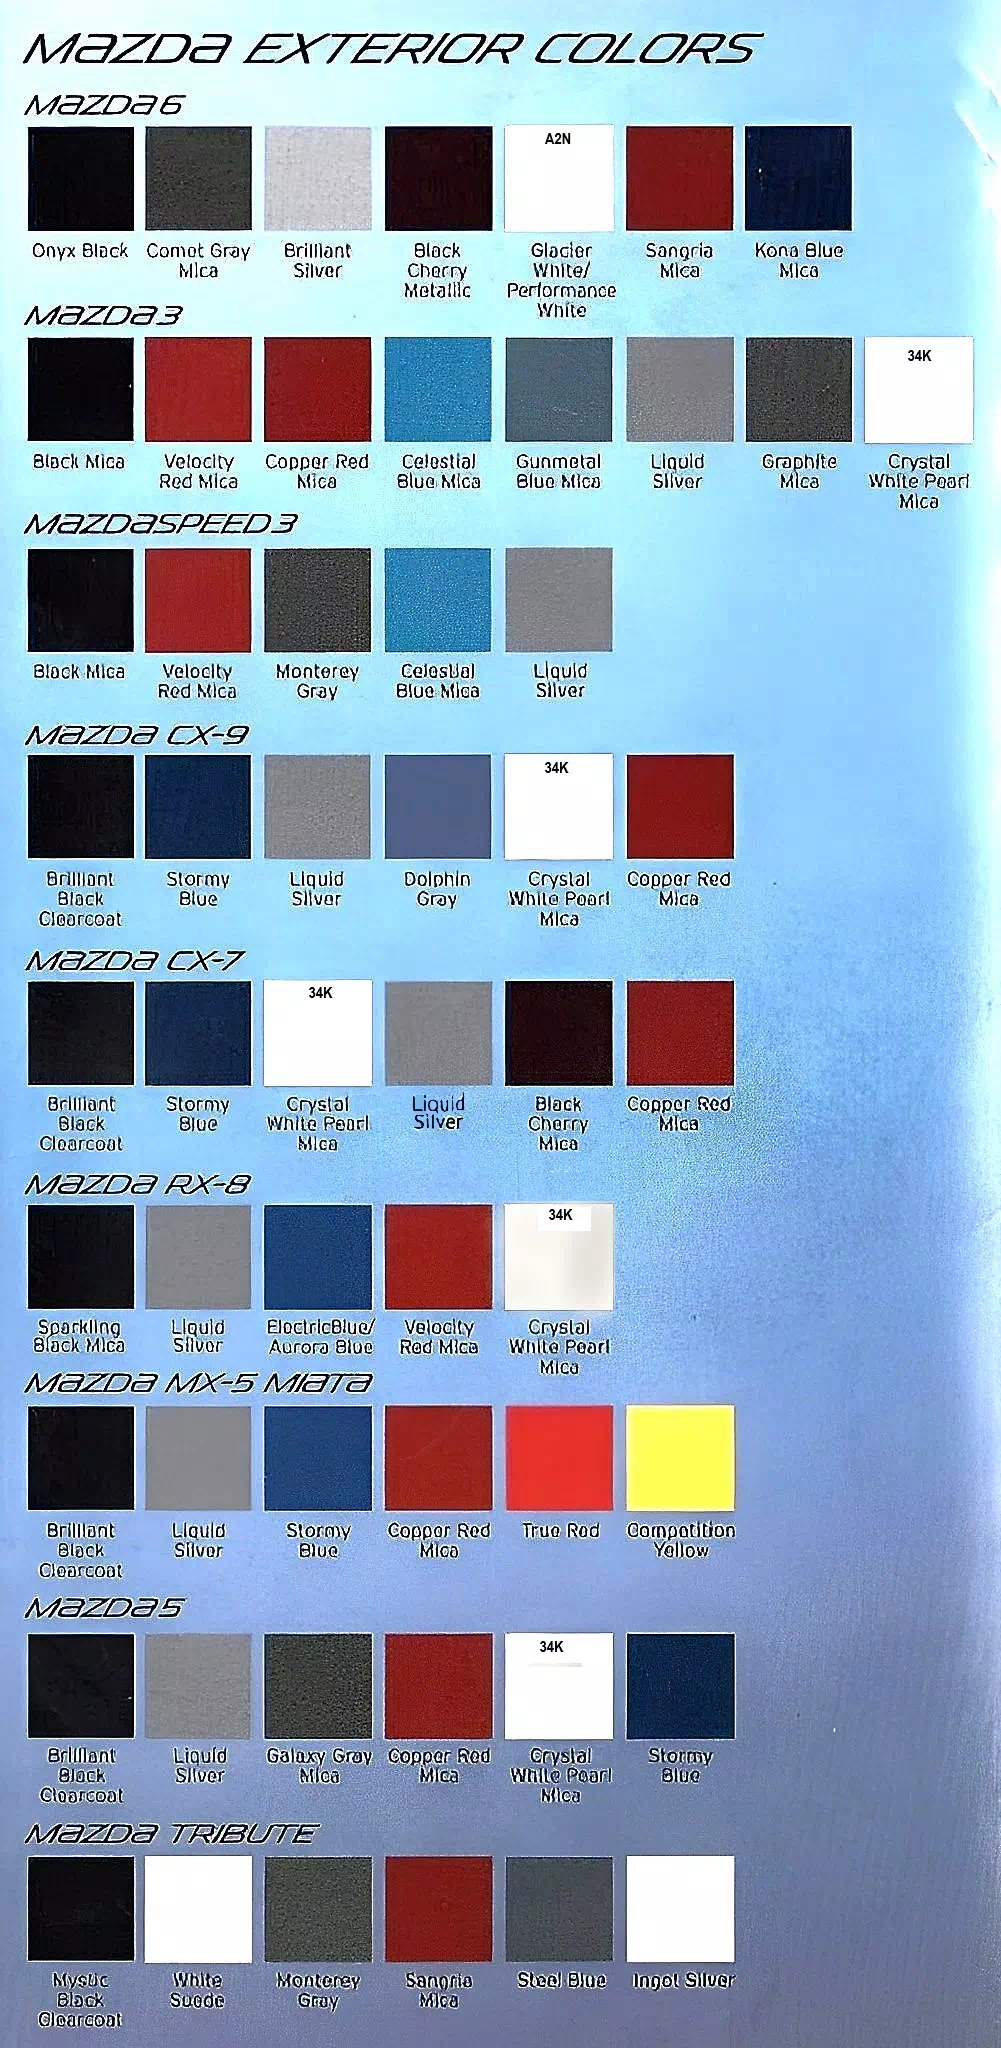 A chart showing models to exterior colors for 2010 Mazda Automobiles.